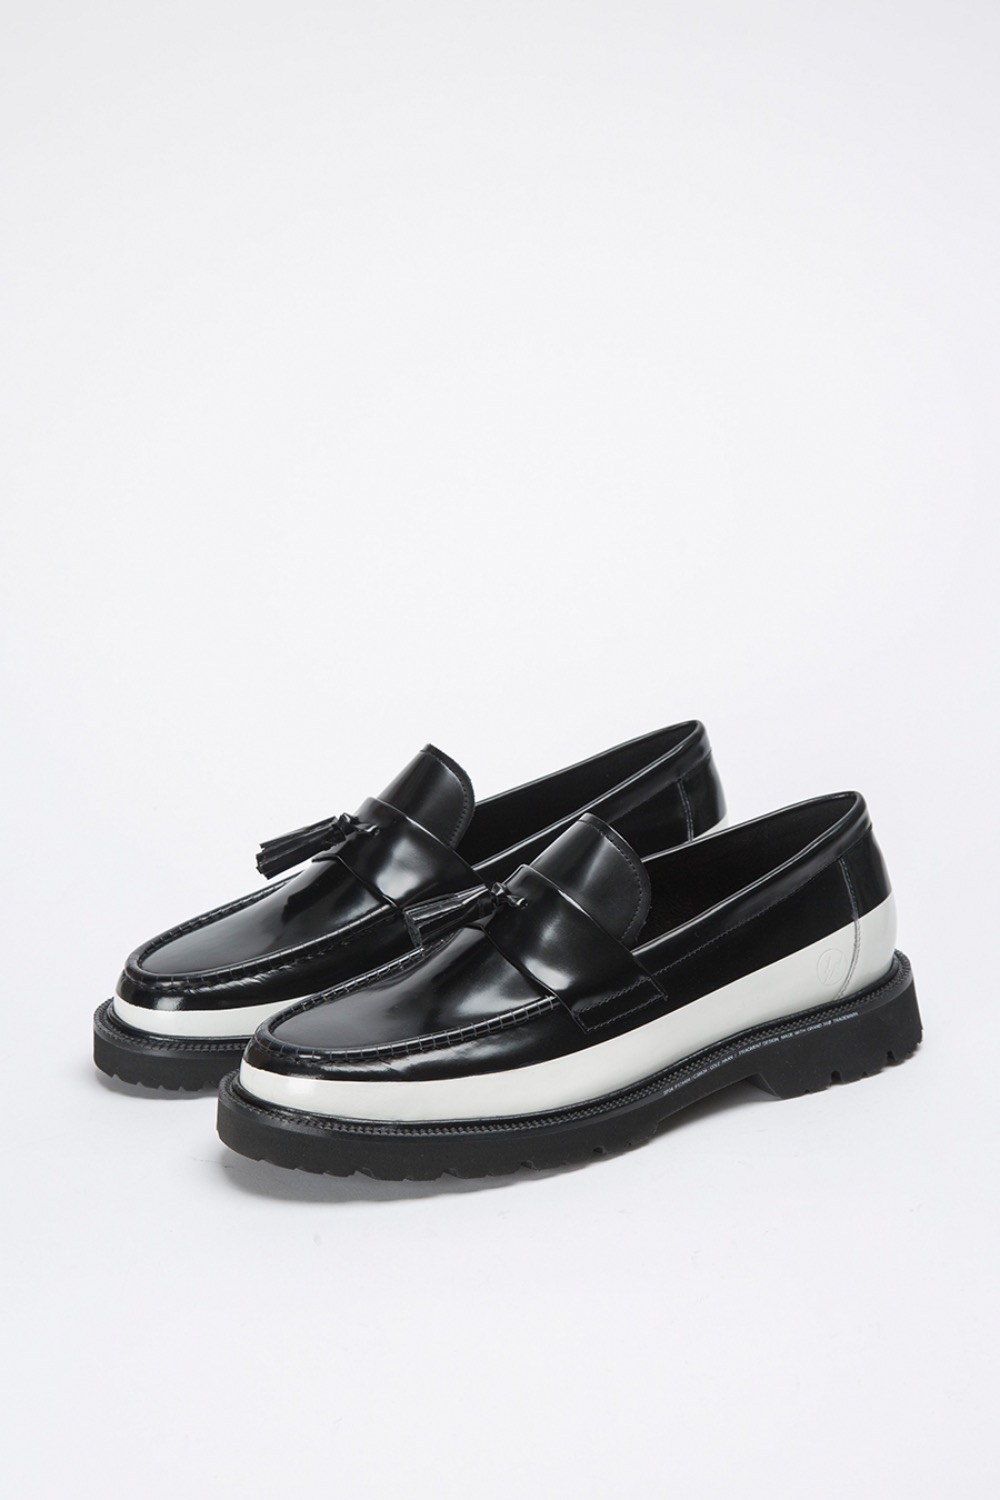 24SS) CH X FRAGMENT AMERICAN CLASSICS PENNY LOAFER BLACK/BLACK 